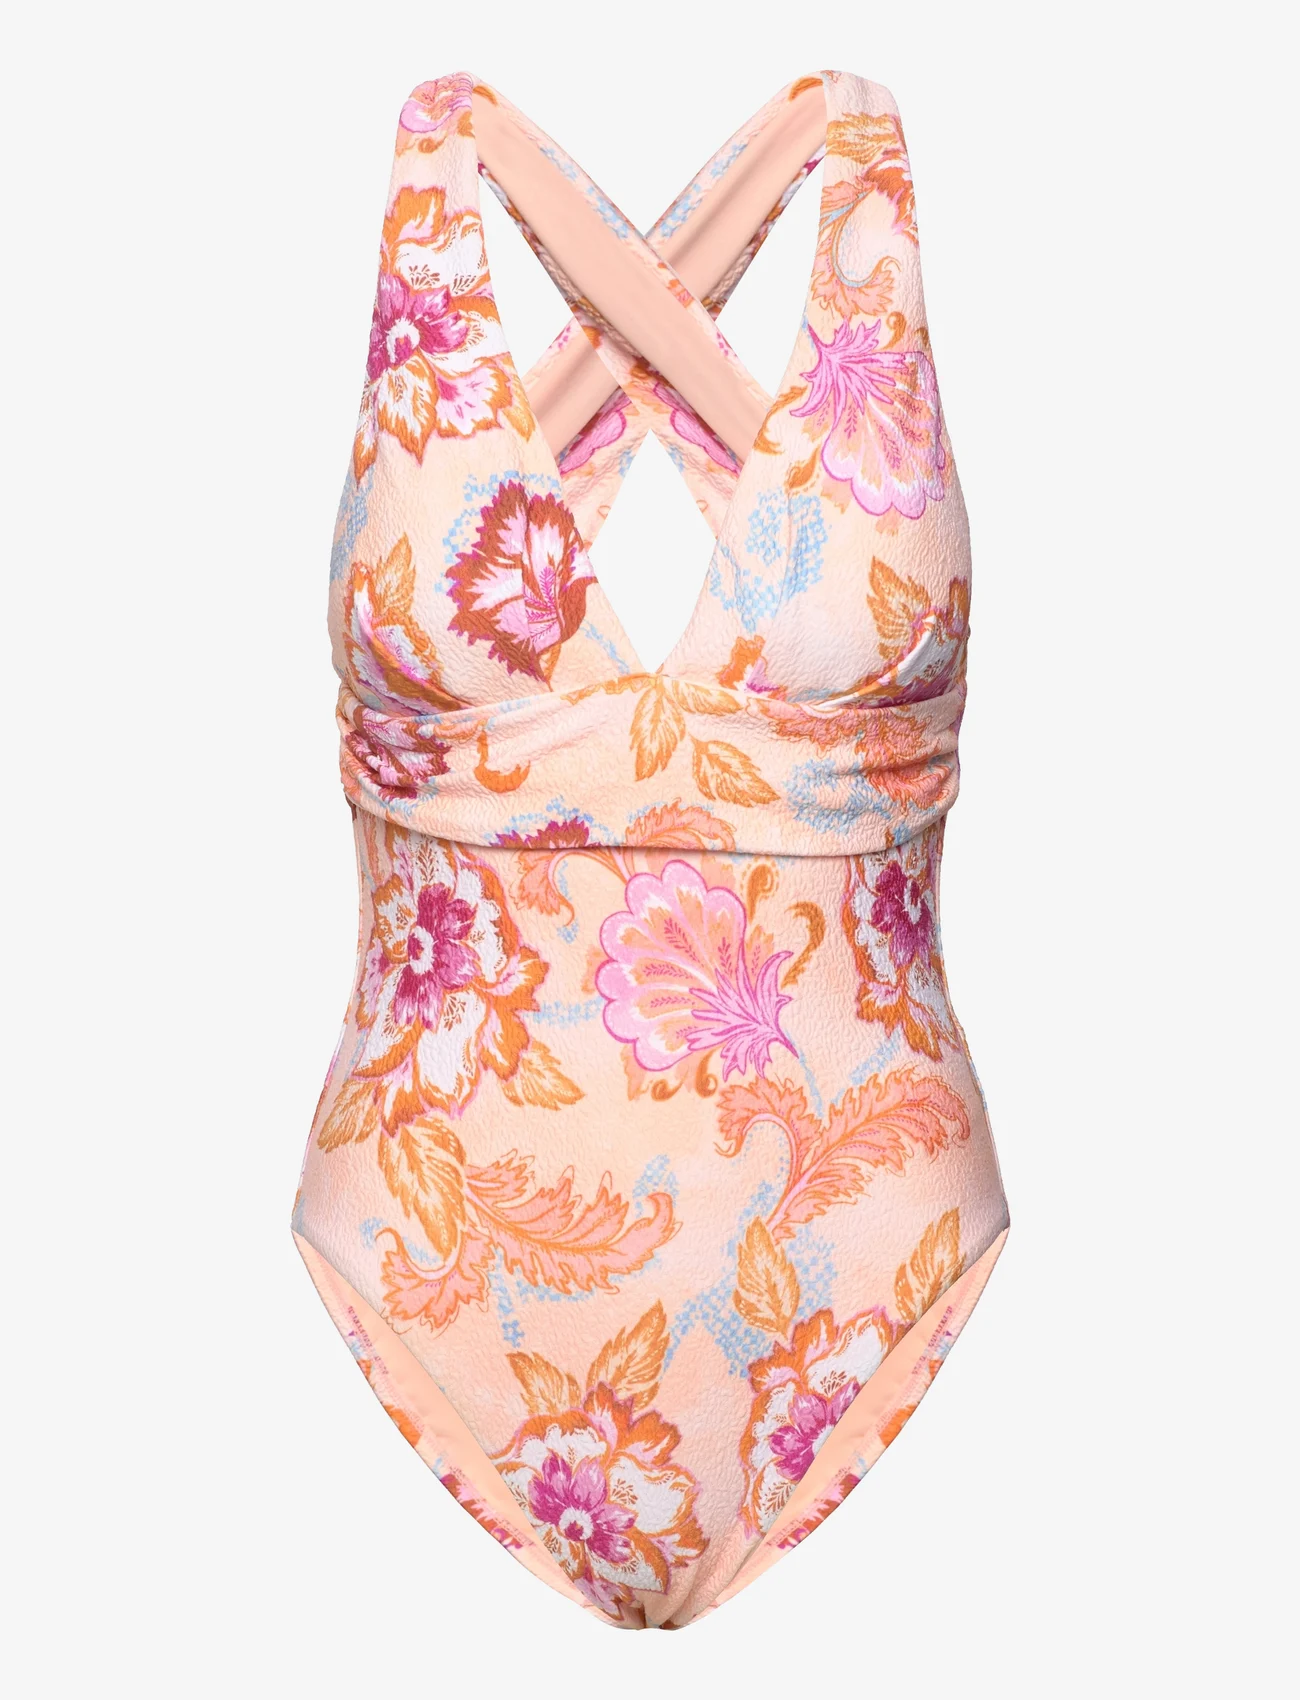 Seafolly - Spring Festival Cross Back One Piece - swimsuits - nectar - 1